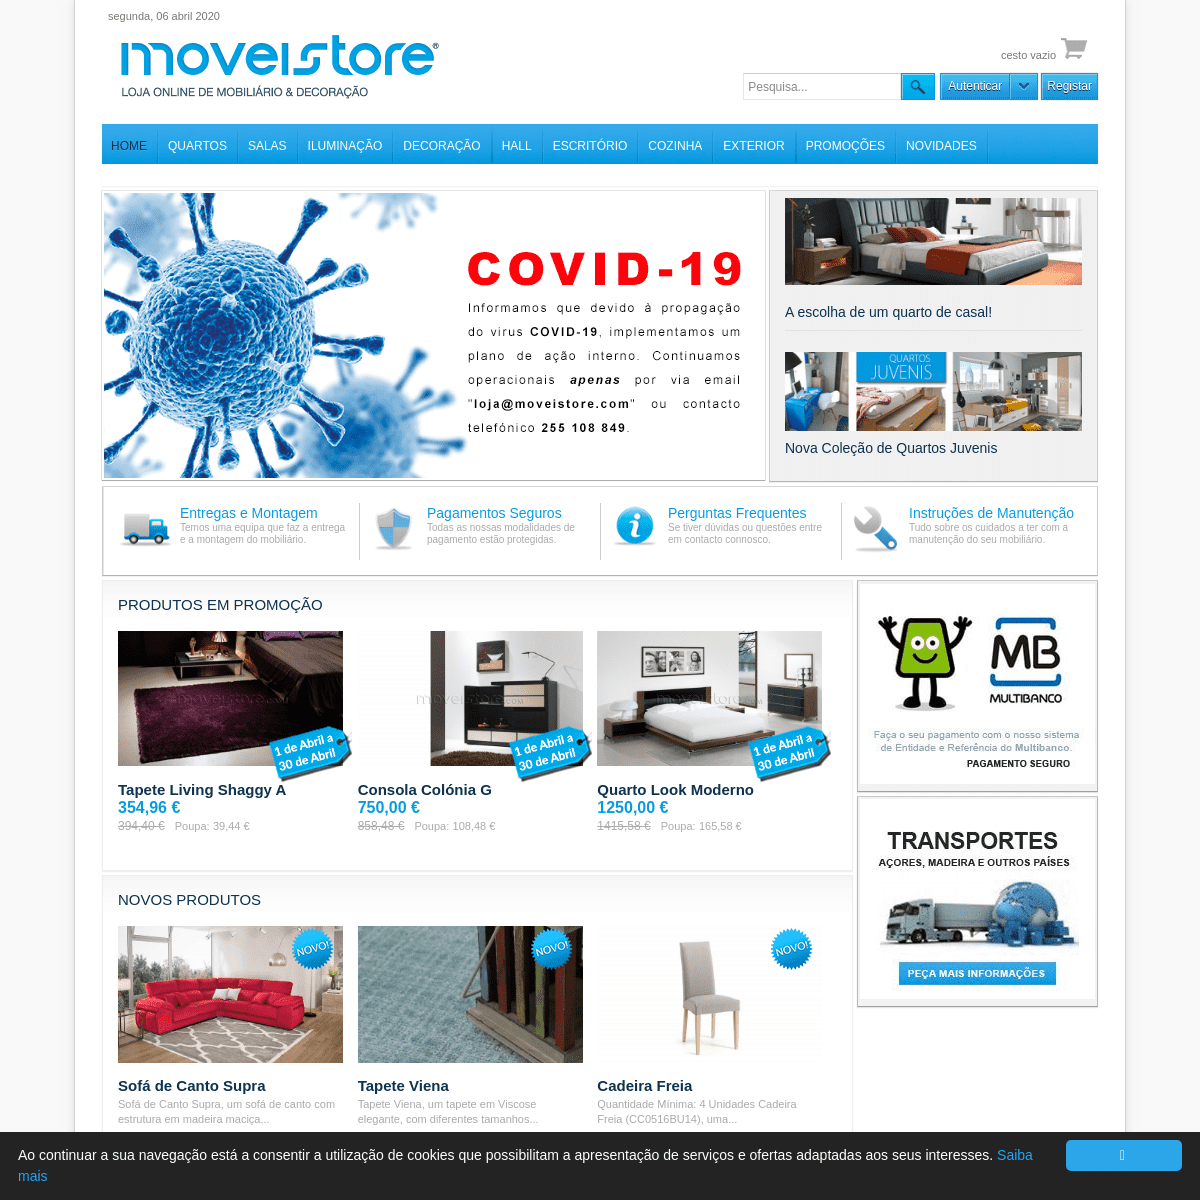 A complete backup of moveistore.com